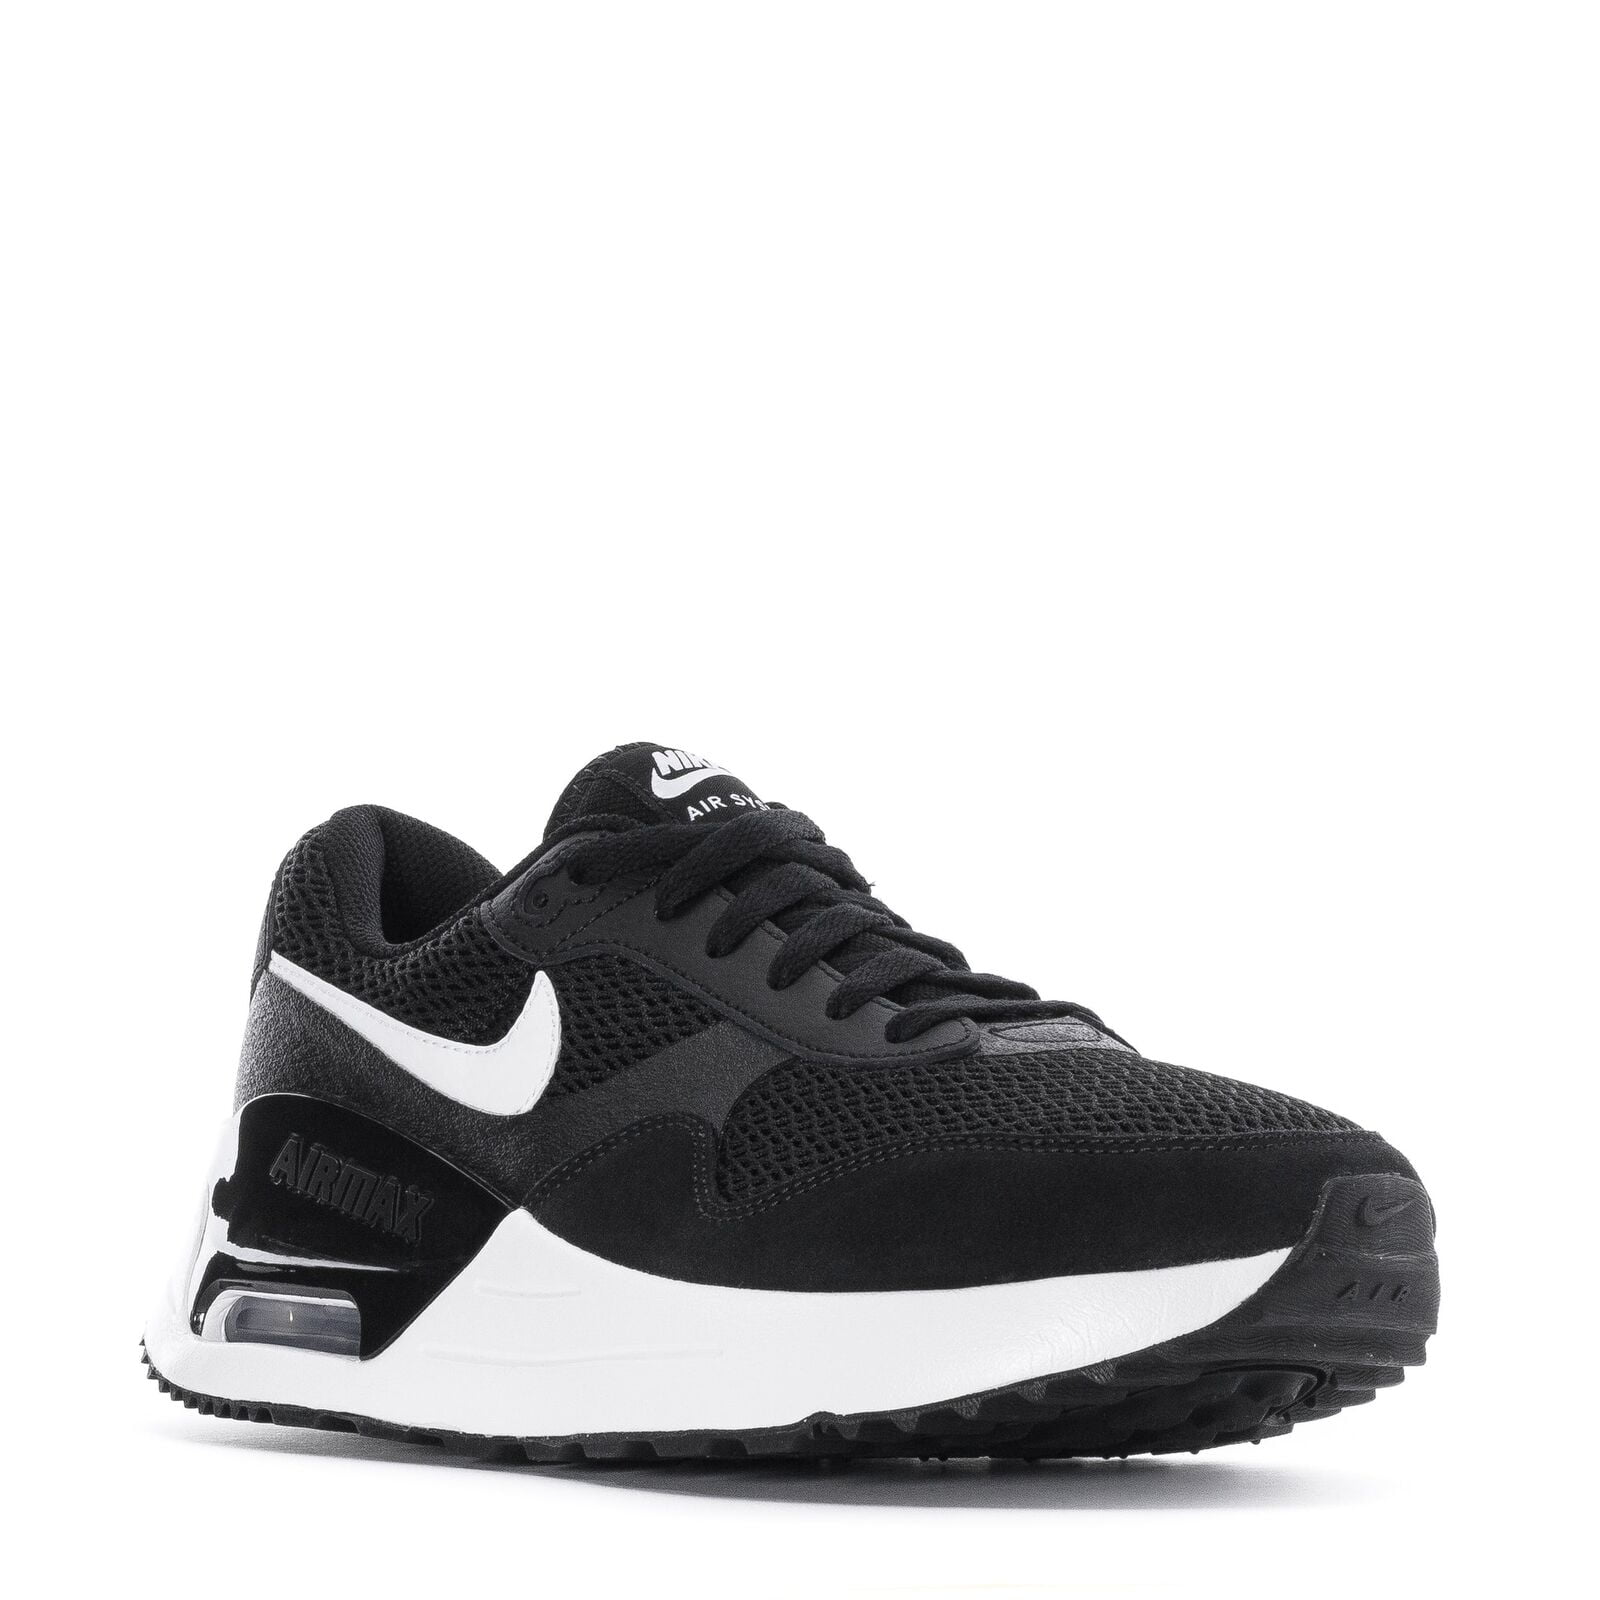 Nike Men's Air Max System Running Shoe DM9537 001 Size 13 US New in the ...